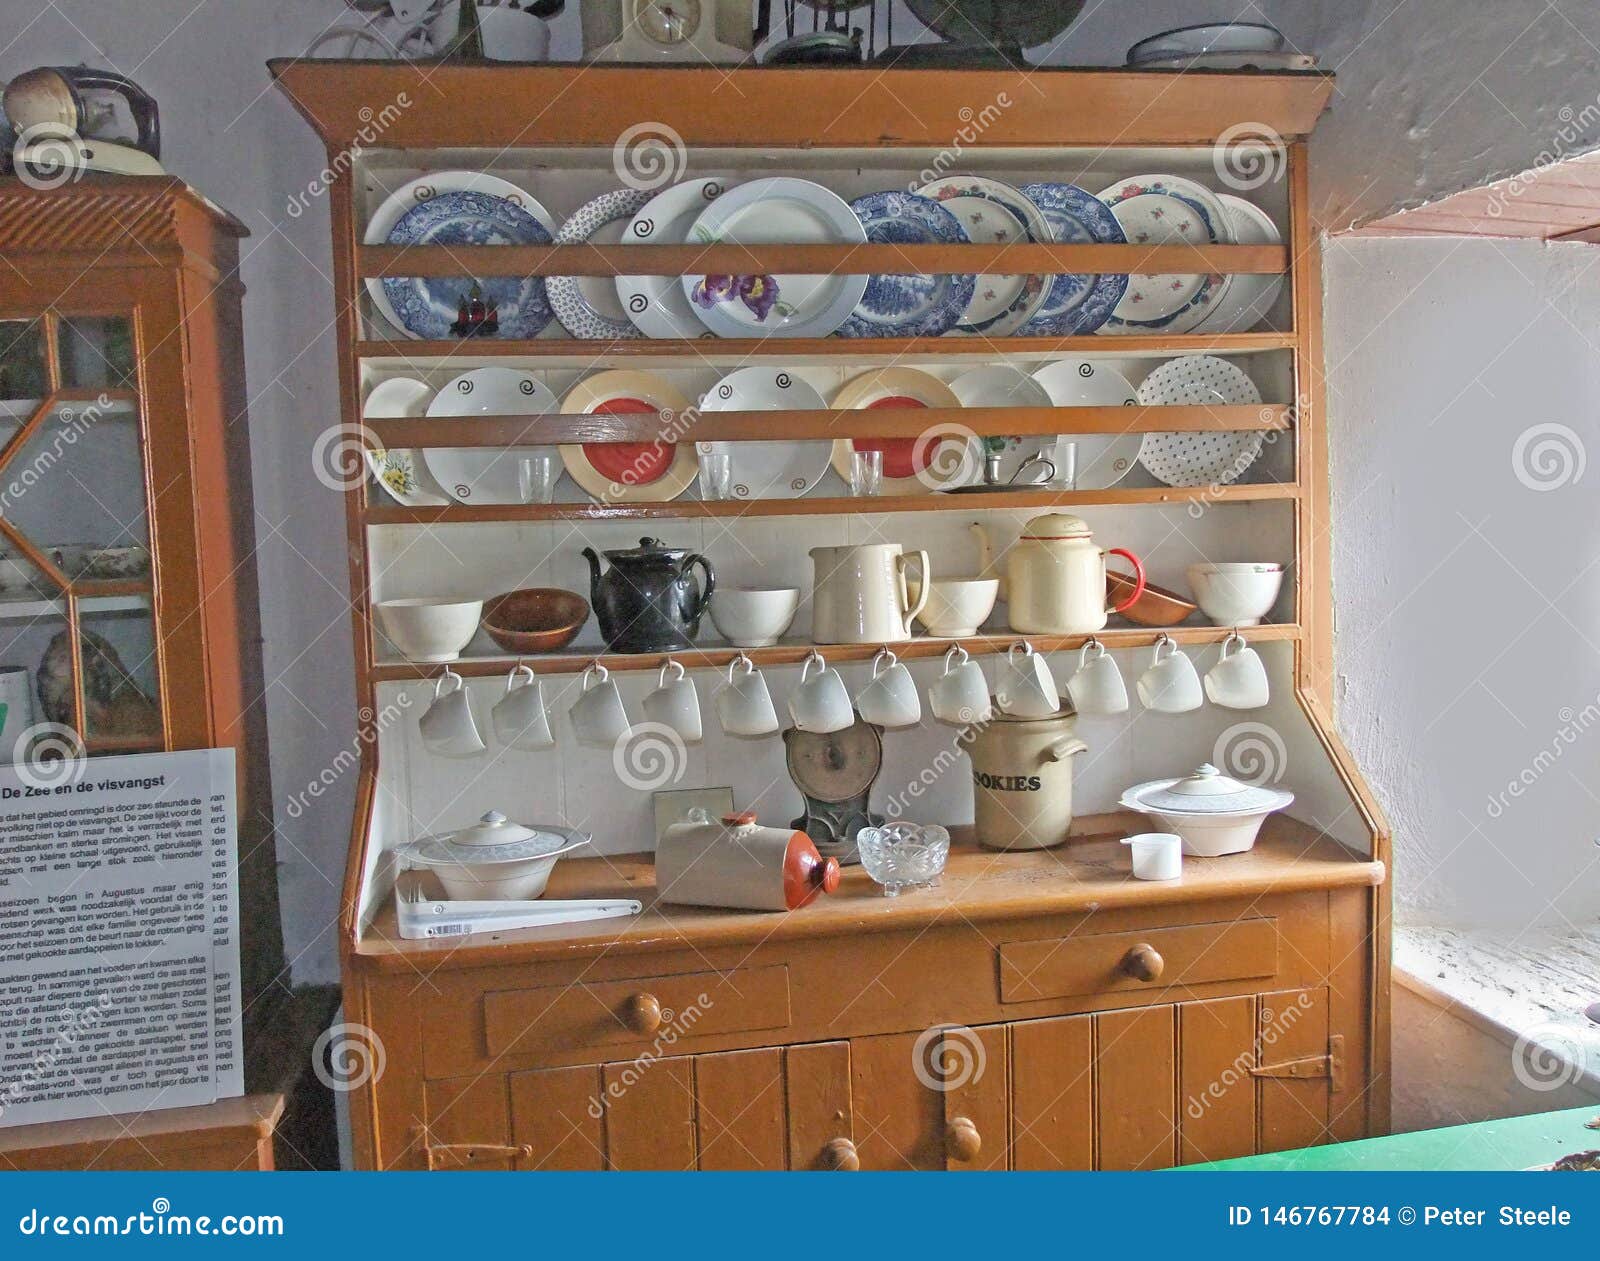 Old Antique Kitchen Dresser With Cups And Plates Ireland Editorial